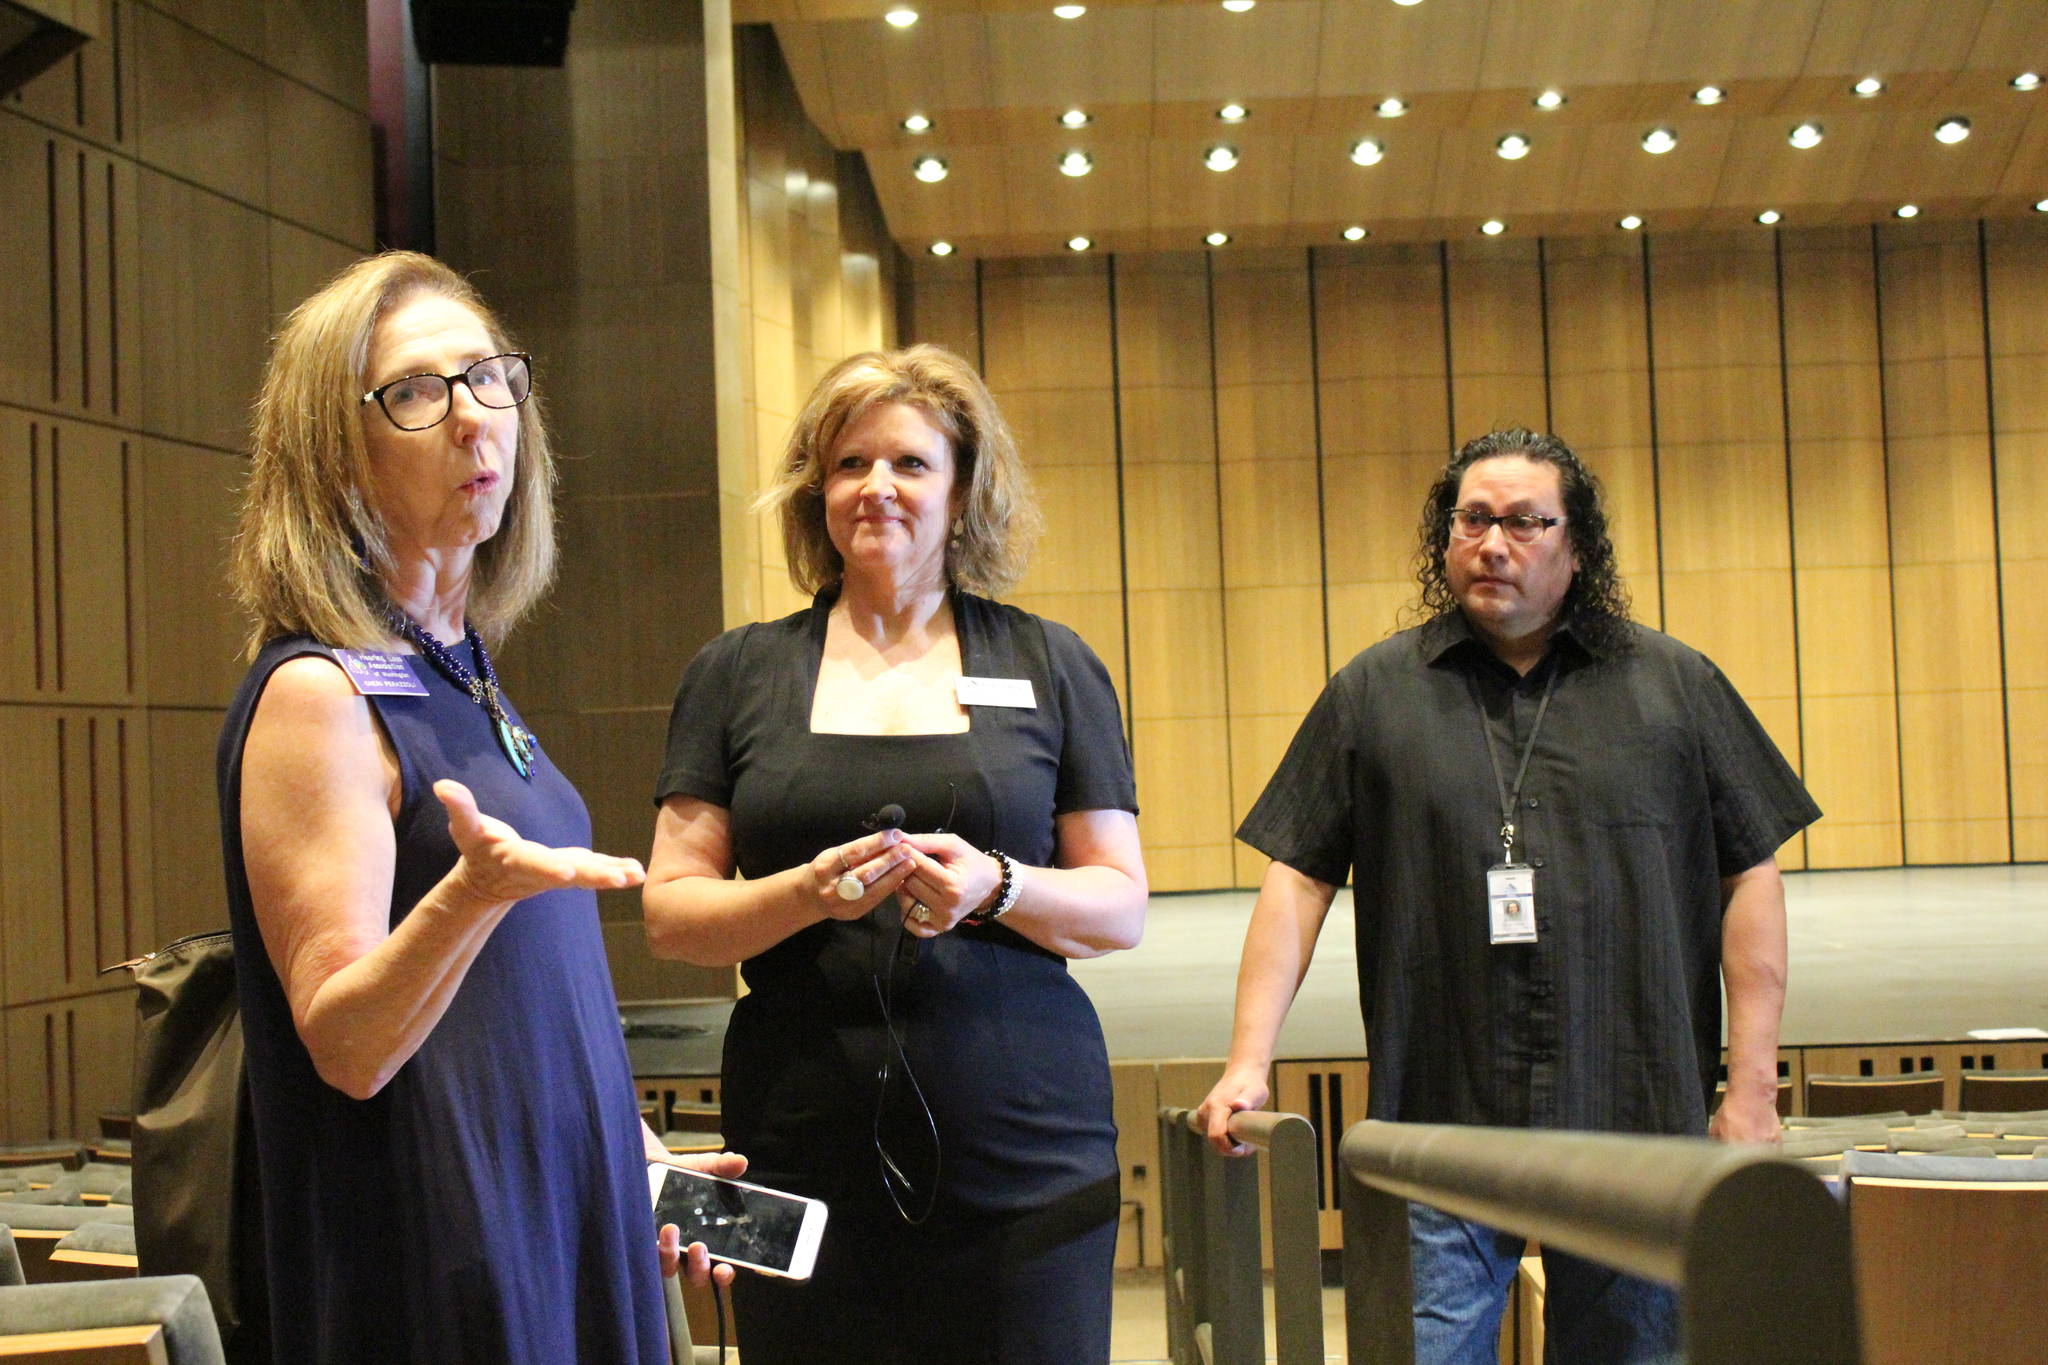 Cheri Perazzoli, left, of the Hearing Loss Association of Washington praises the Hearing Loop technology during an Aug. 3 tour of the Performing Arts and Event Center in Federal Way.